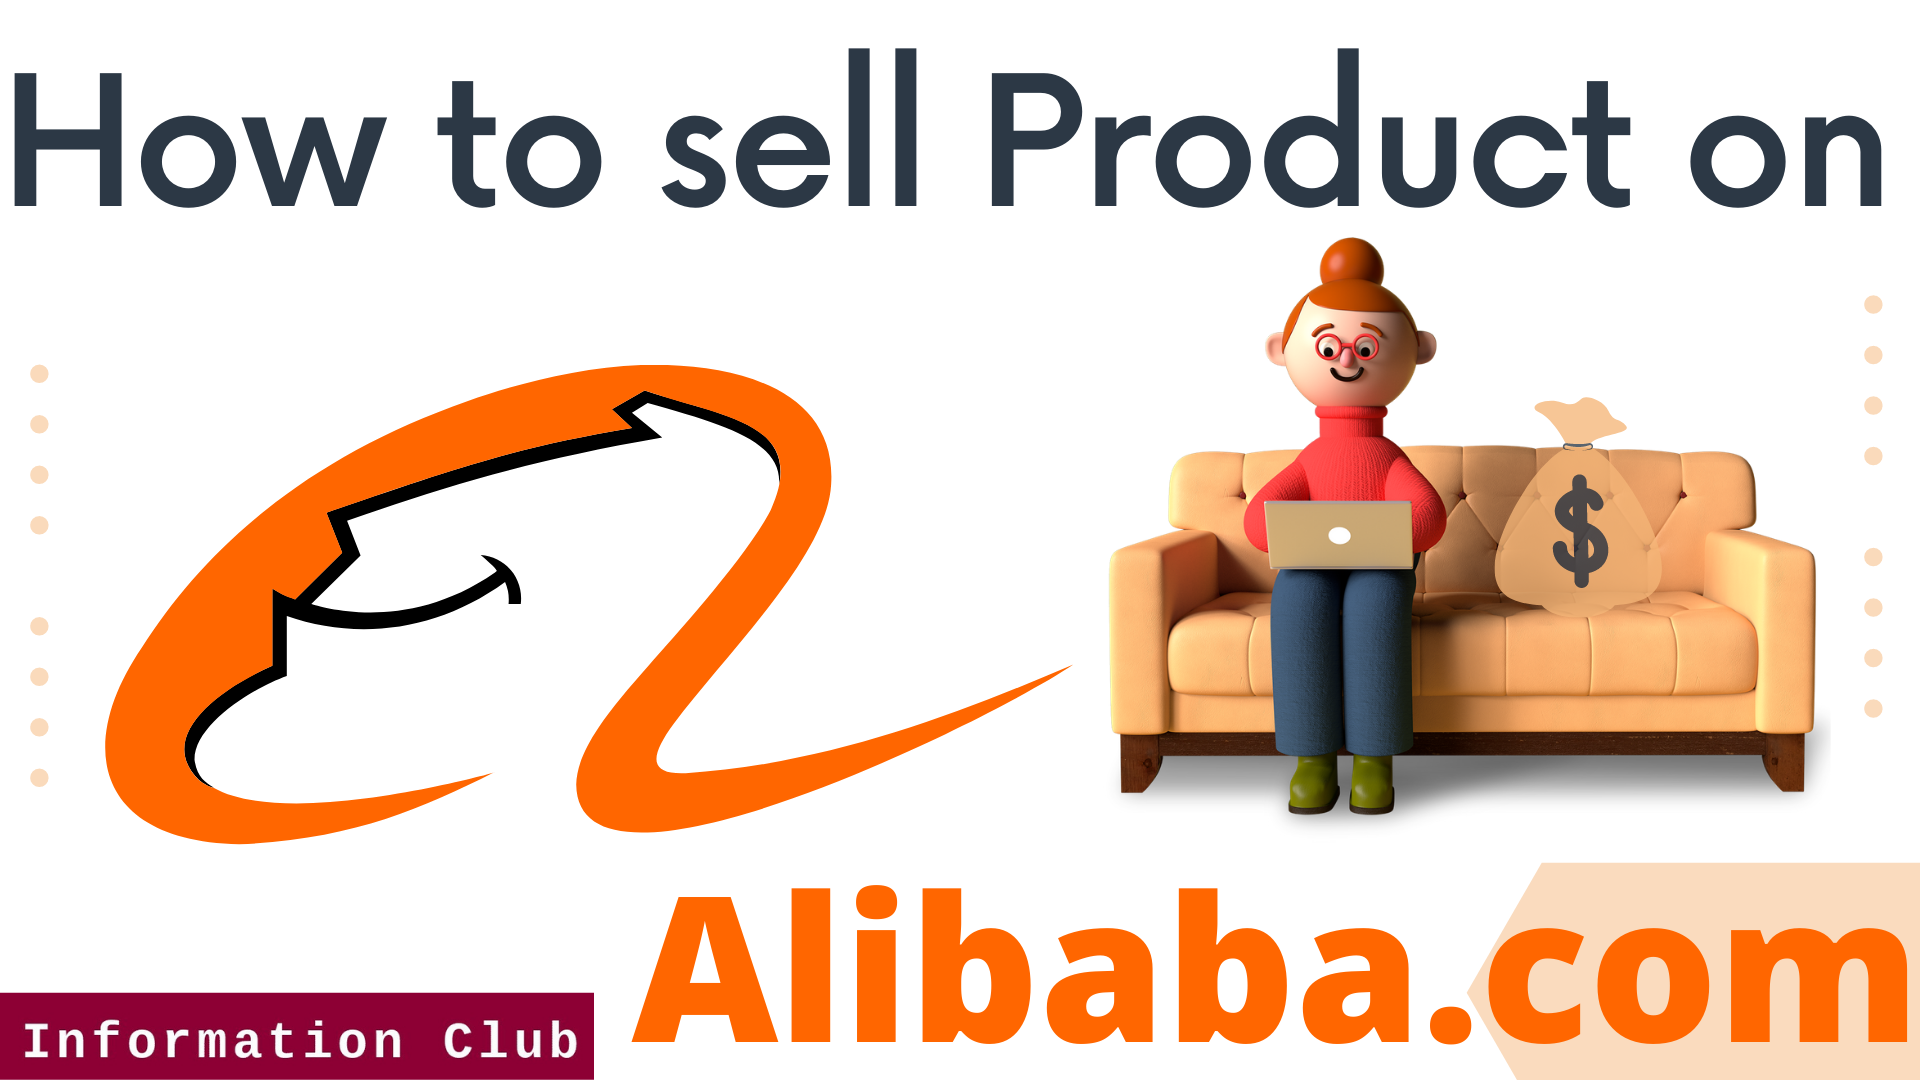 https://www.clubinfonline.com/2020/11/29/how-to-sell-products-on-alibaba/